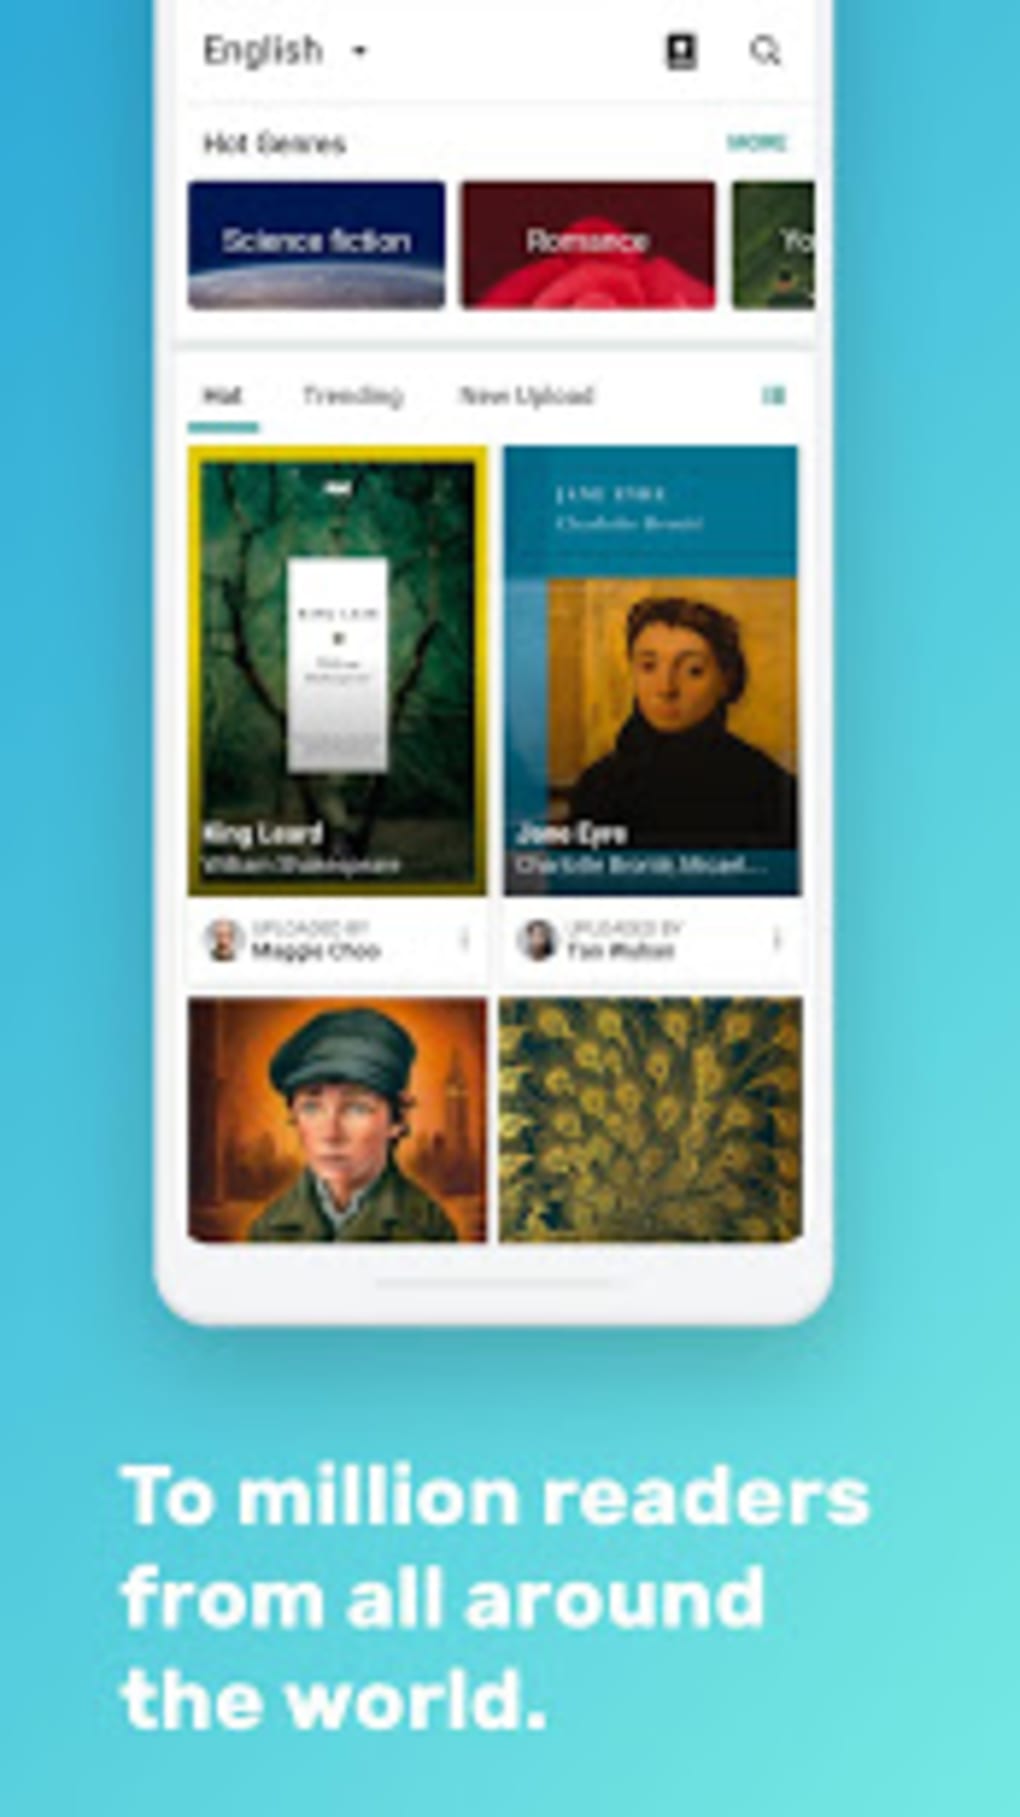 Bookhub Apk For Android Download - free robux pro helper 2019 apk app free download for android